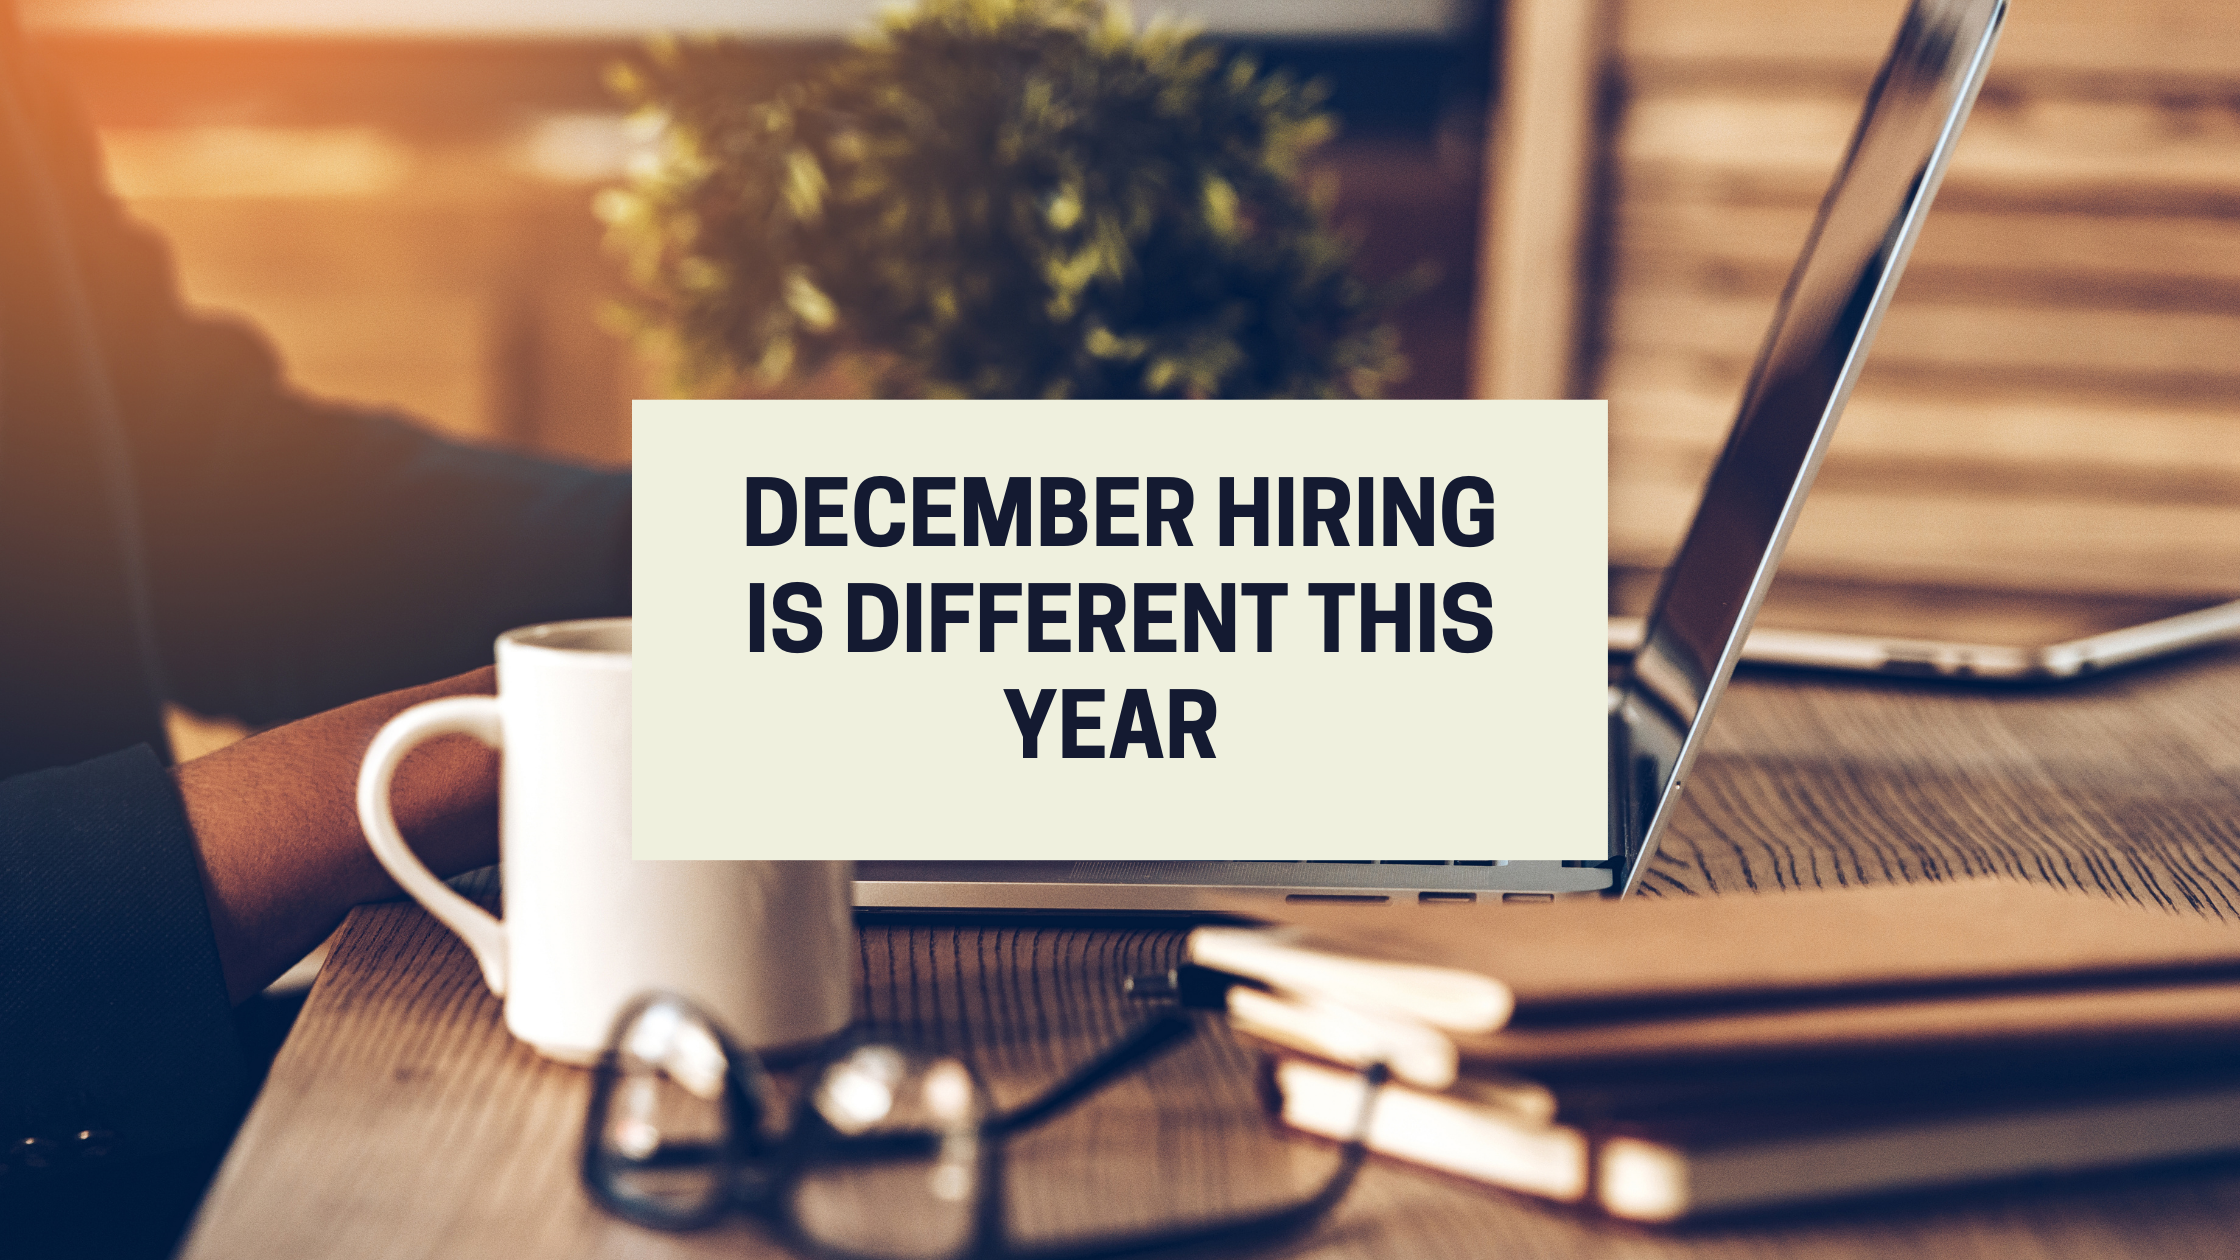 December hiring is different this year